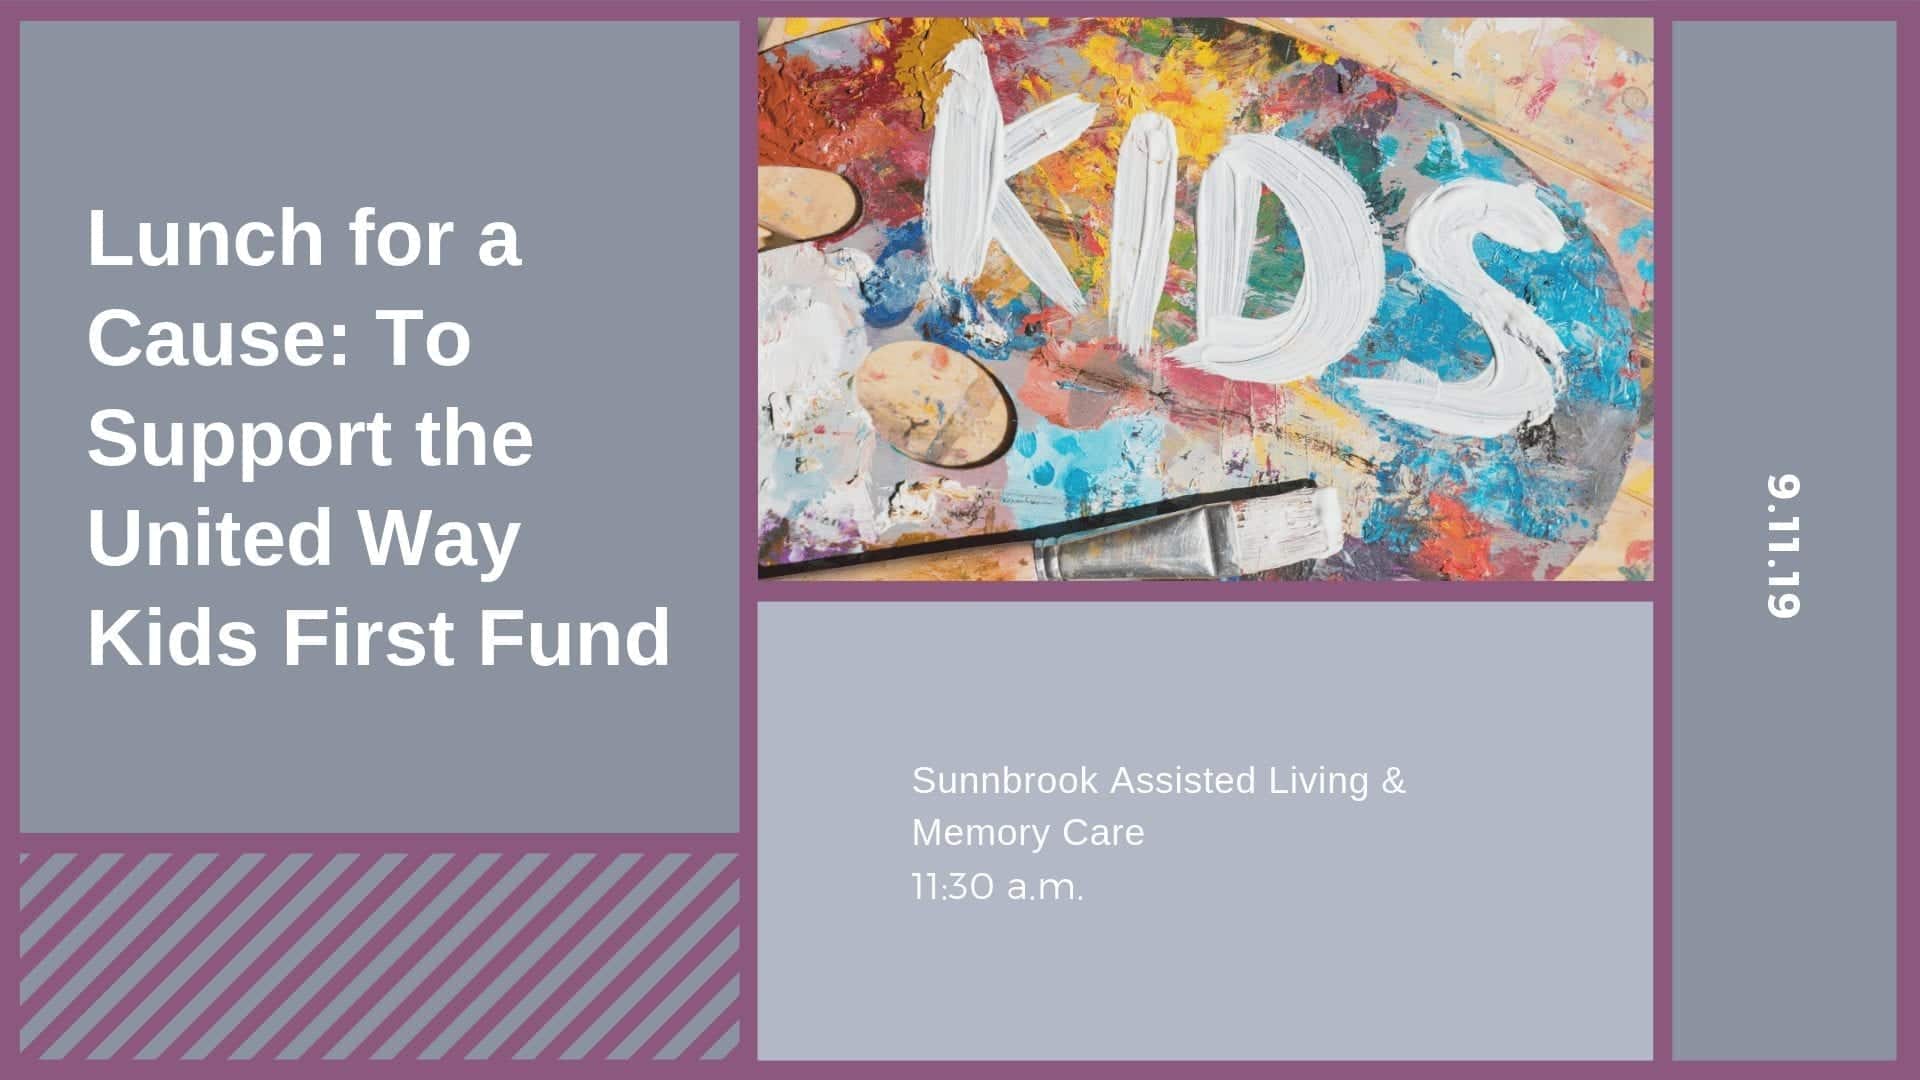 Lunch for a Cause: To Support the United Way Kids First Fund